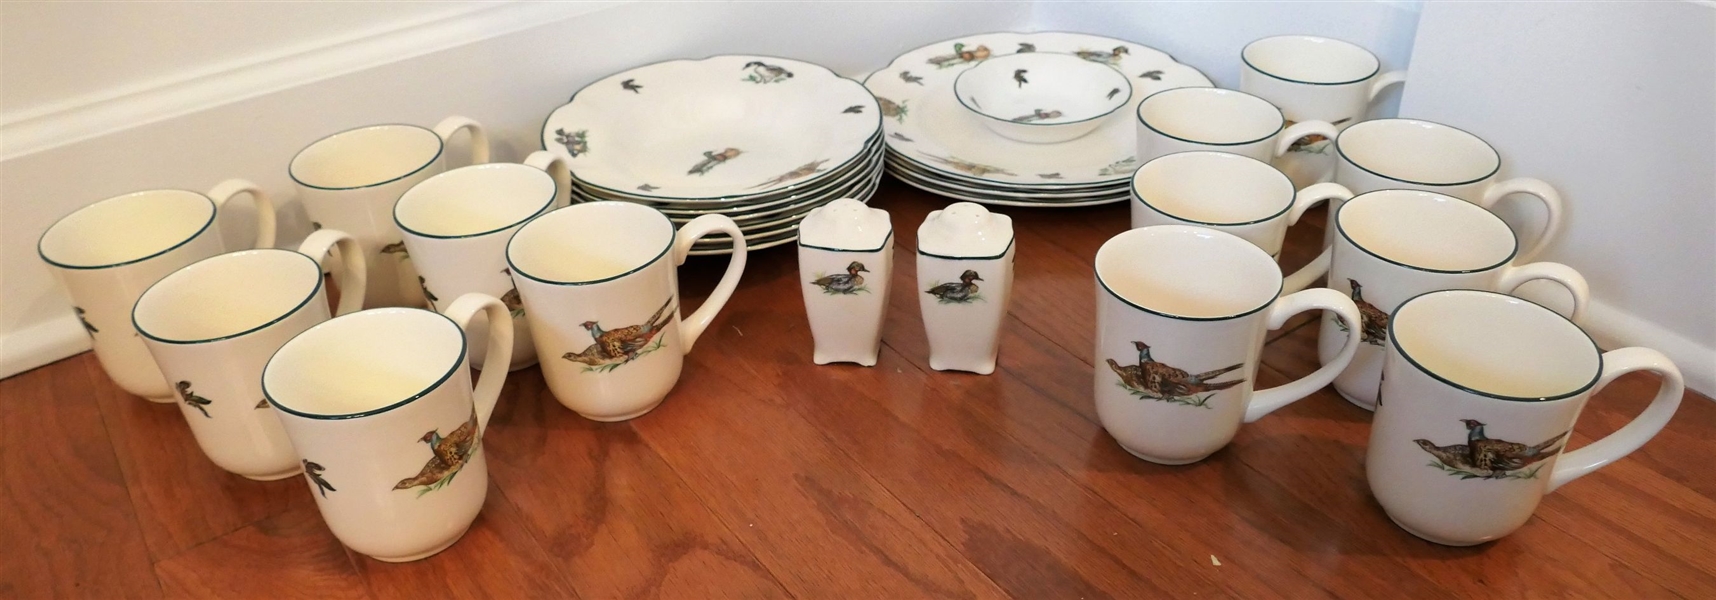 25 Pieces of Johnson Brothers "Brookshire" China including Mugs, 3 Dinner Plates, Soup Bowls, and Salt and Pepper Shakers